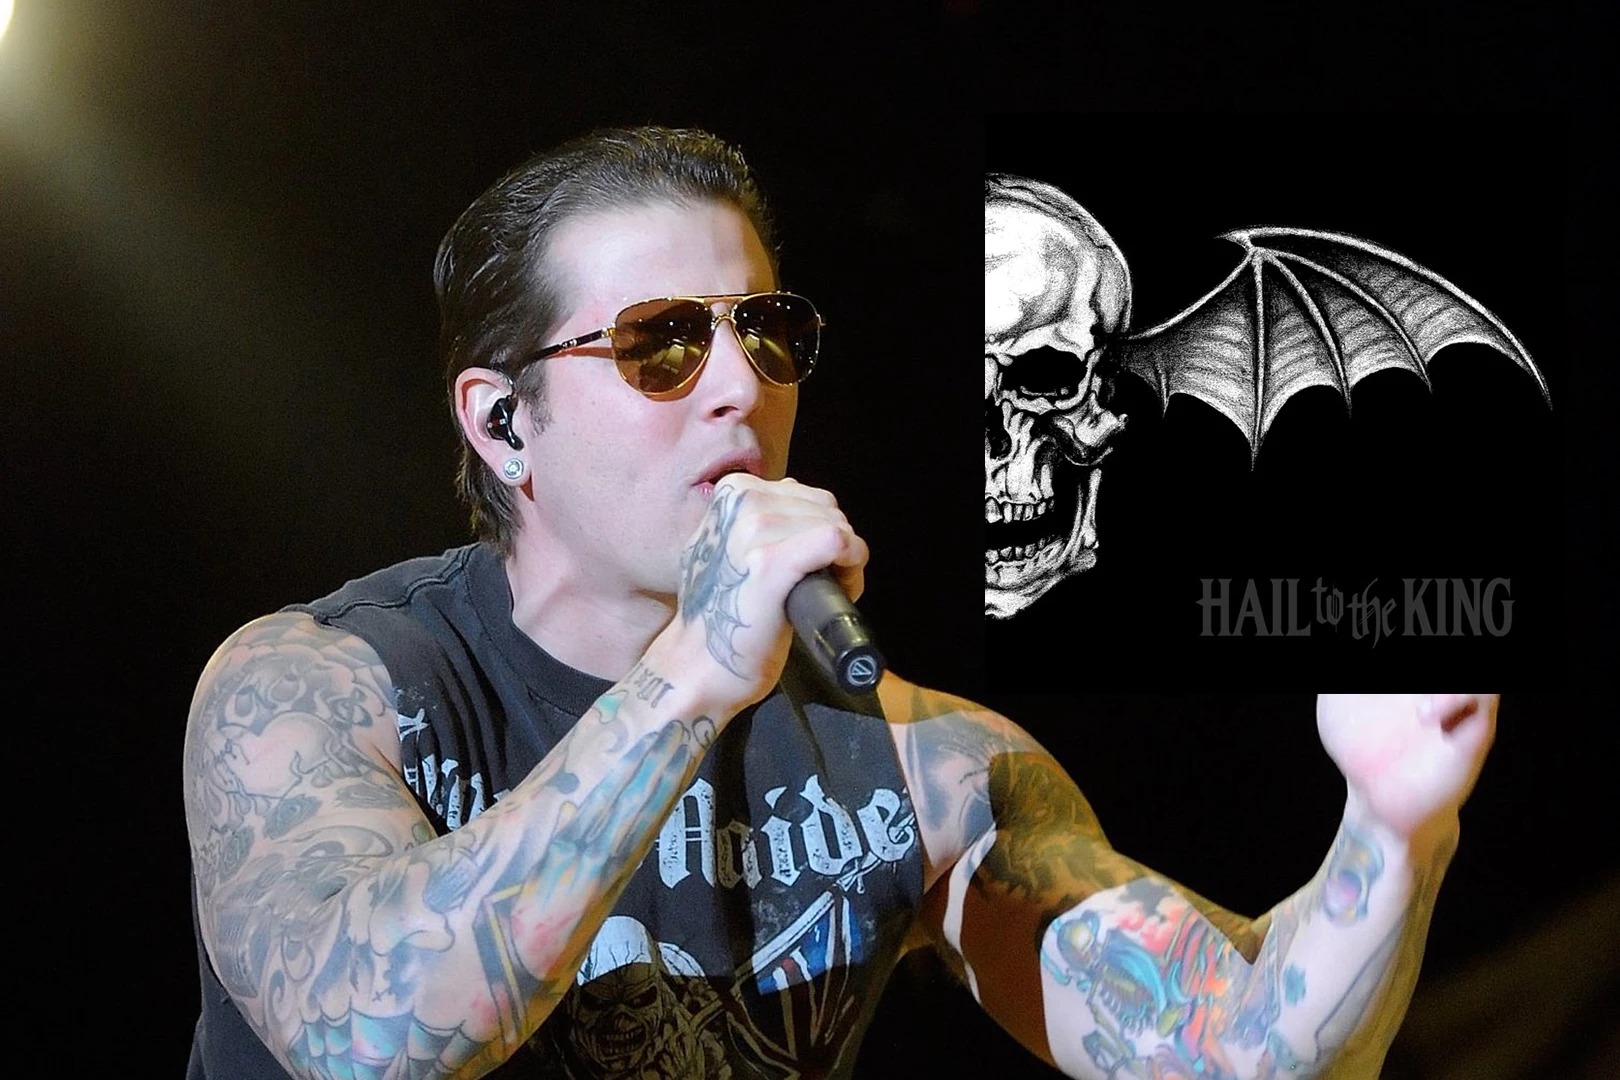 Avenged Sevenfold Albums, Songs - Discography - Album of The Year